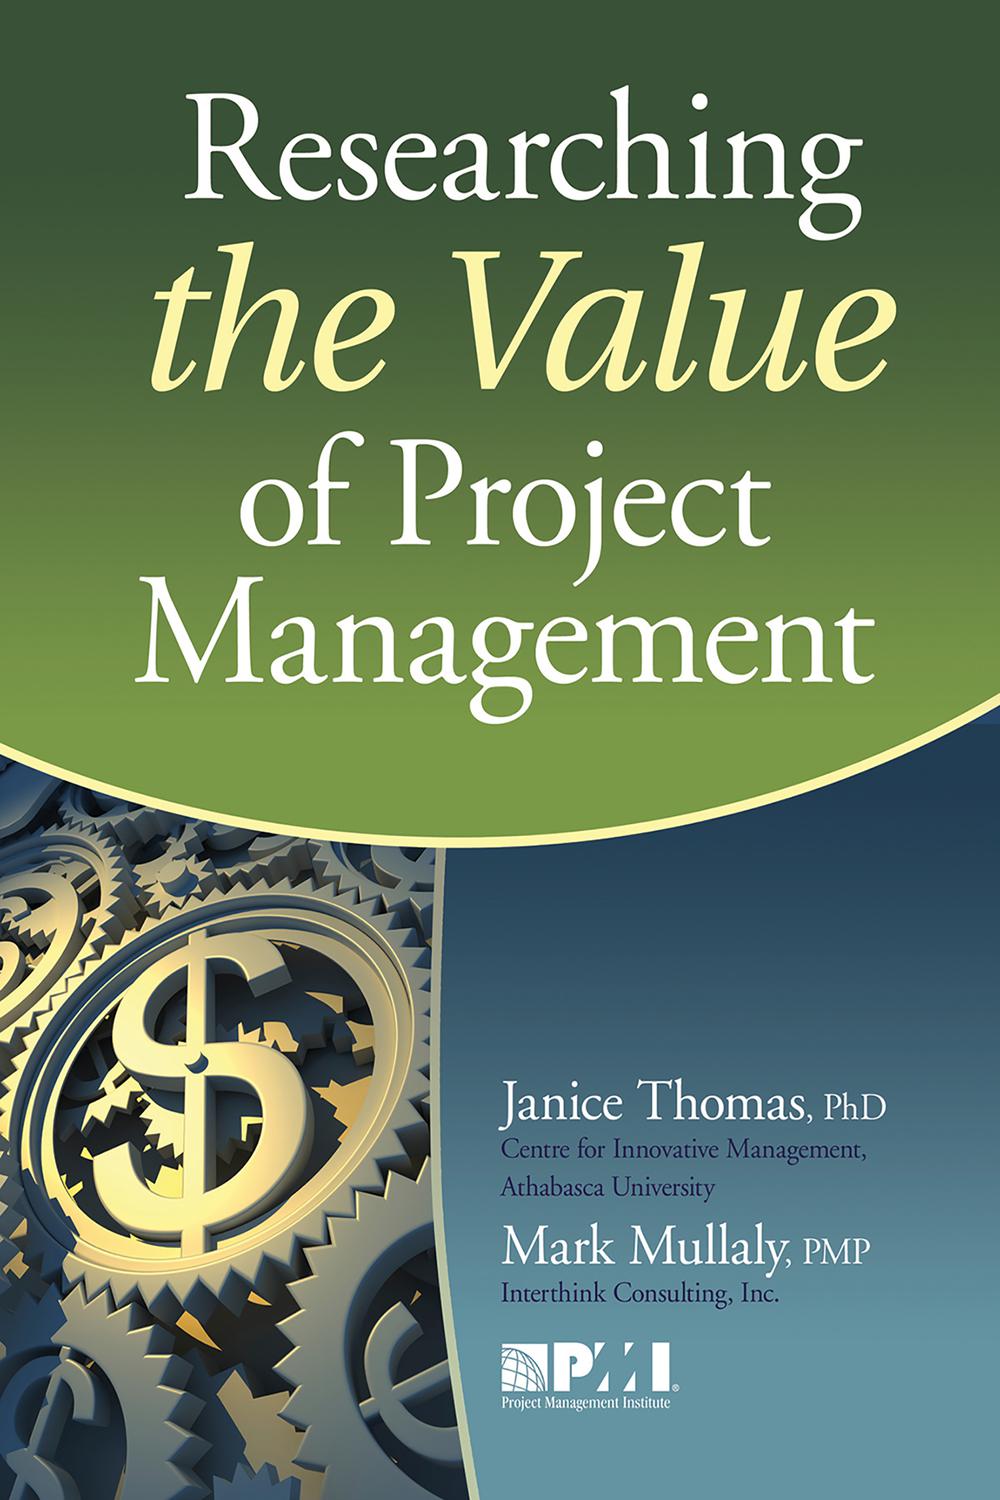 Researching the Value of Project Management - Mark Mullaly, PMP, Janice Thomas